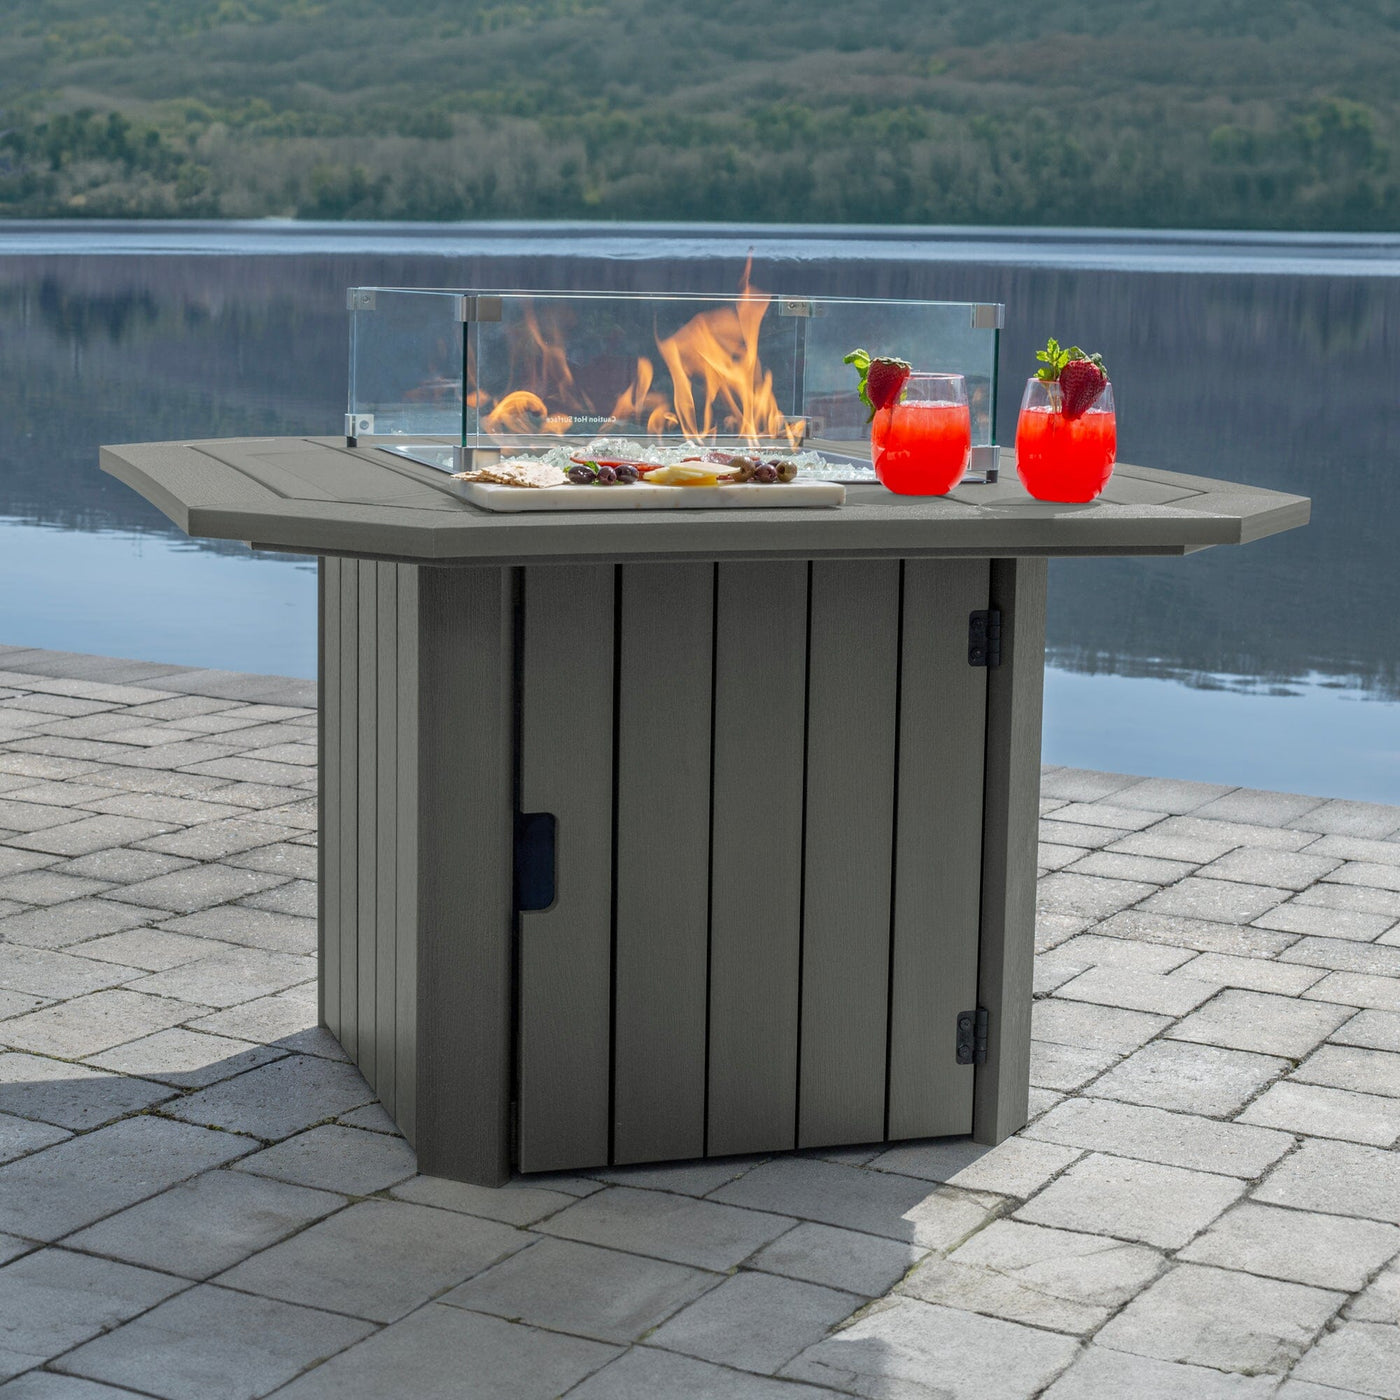 Gray Oasis Fire Table with lit flame and lake in background